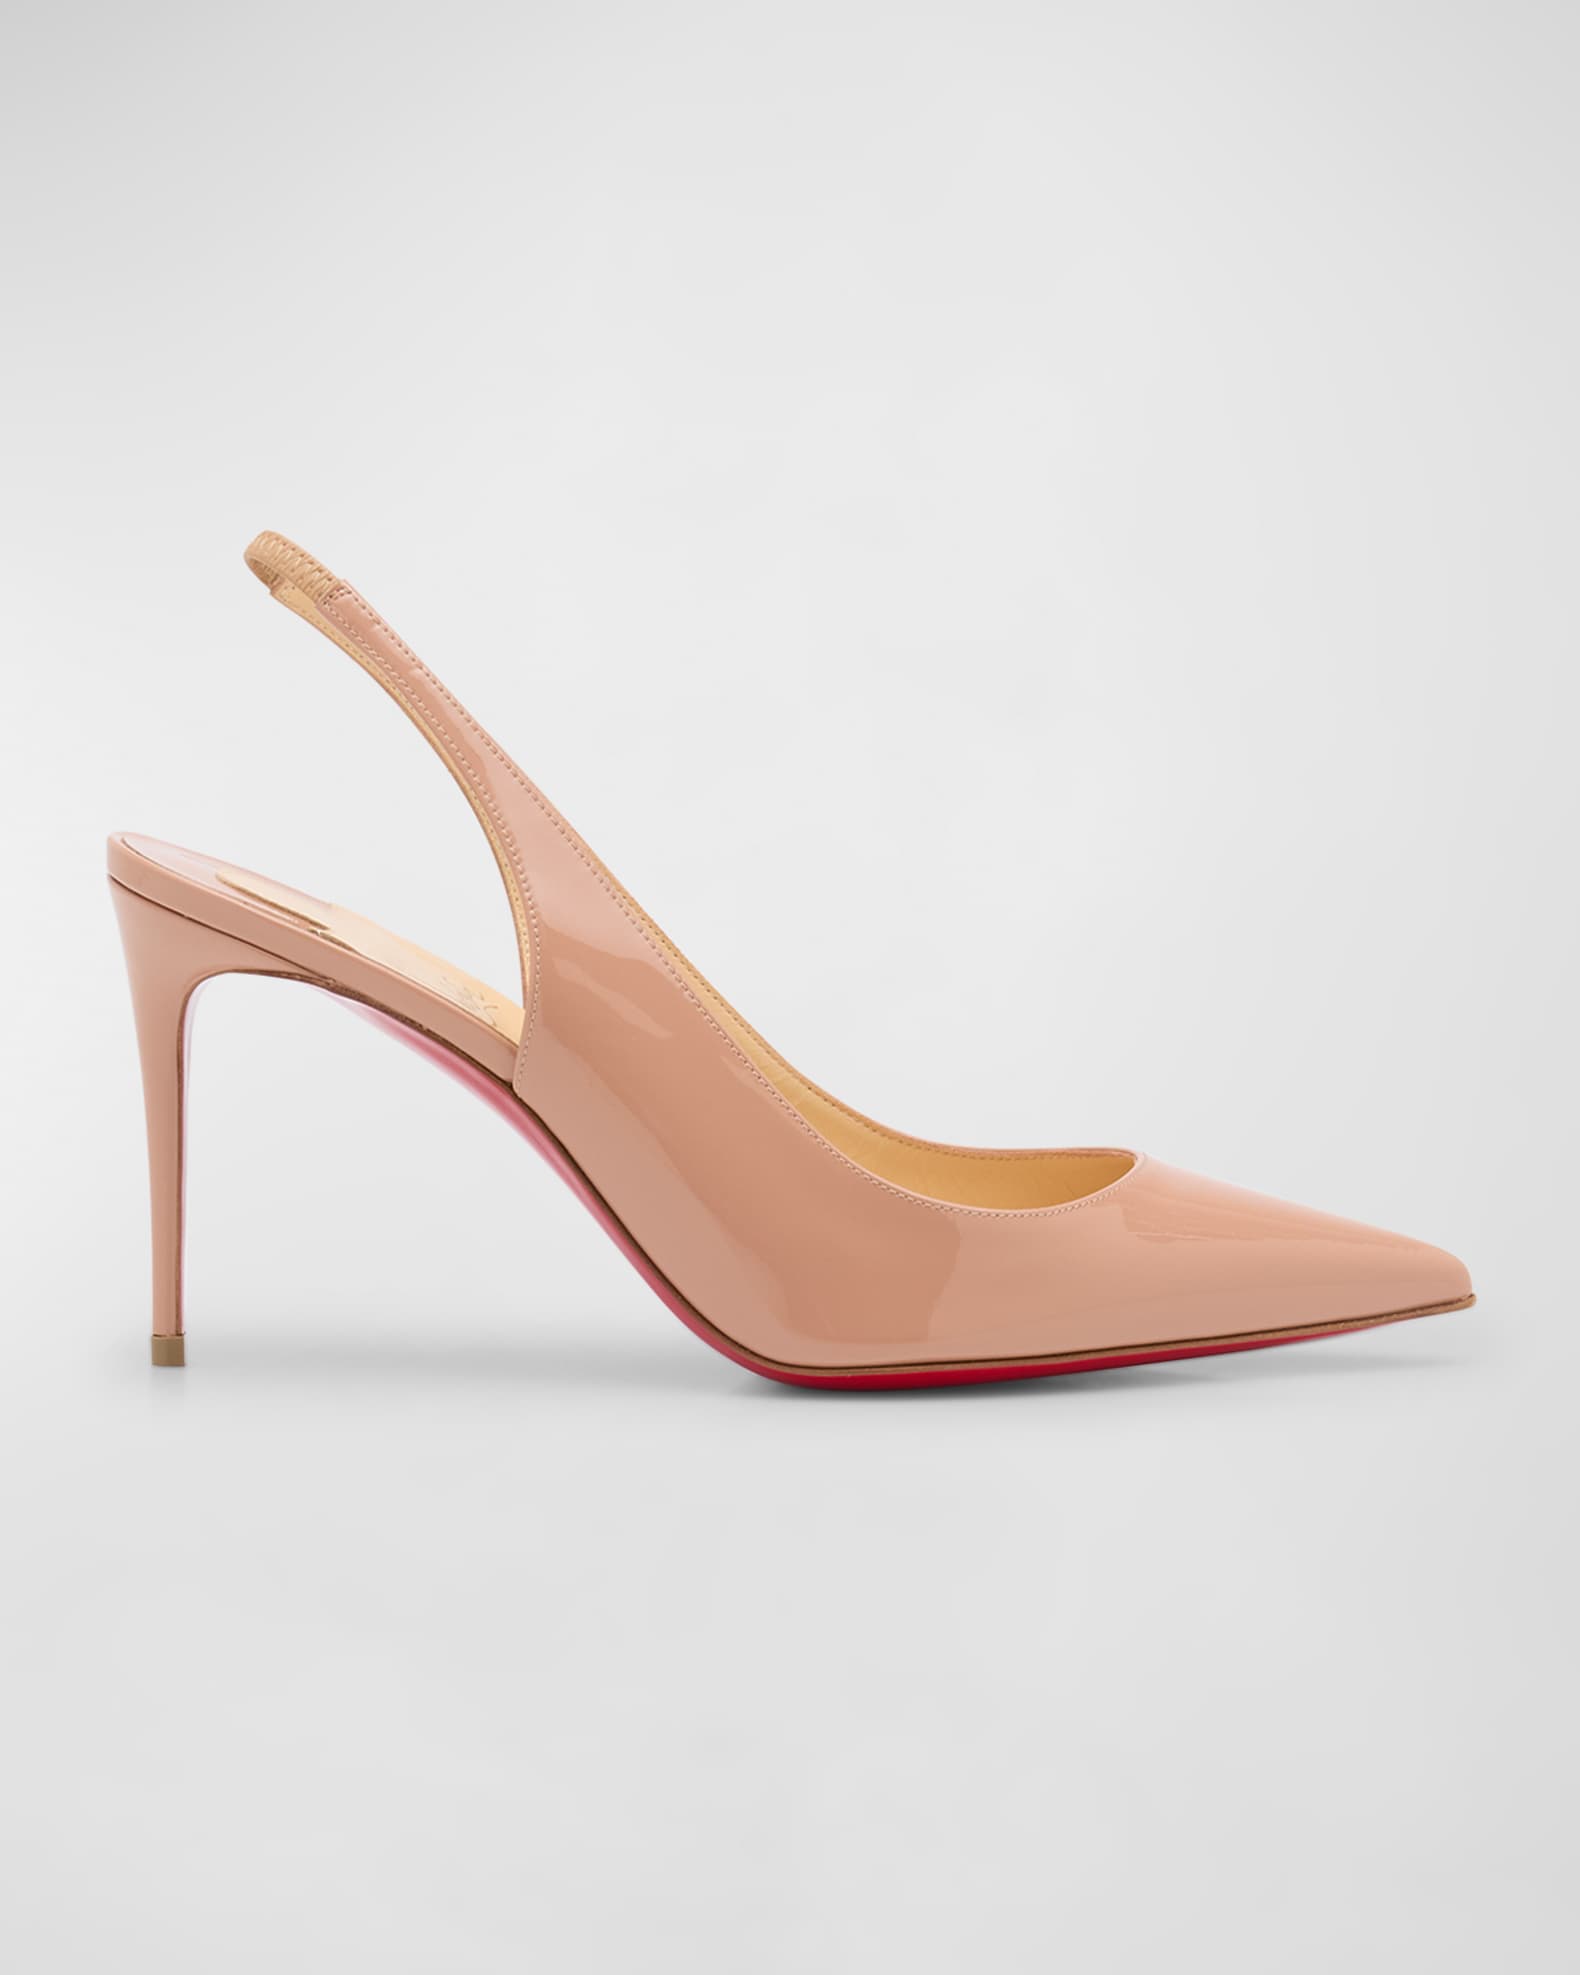 How to identify genuine christian louboutin heels - B+C Guides